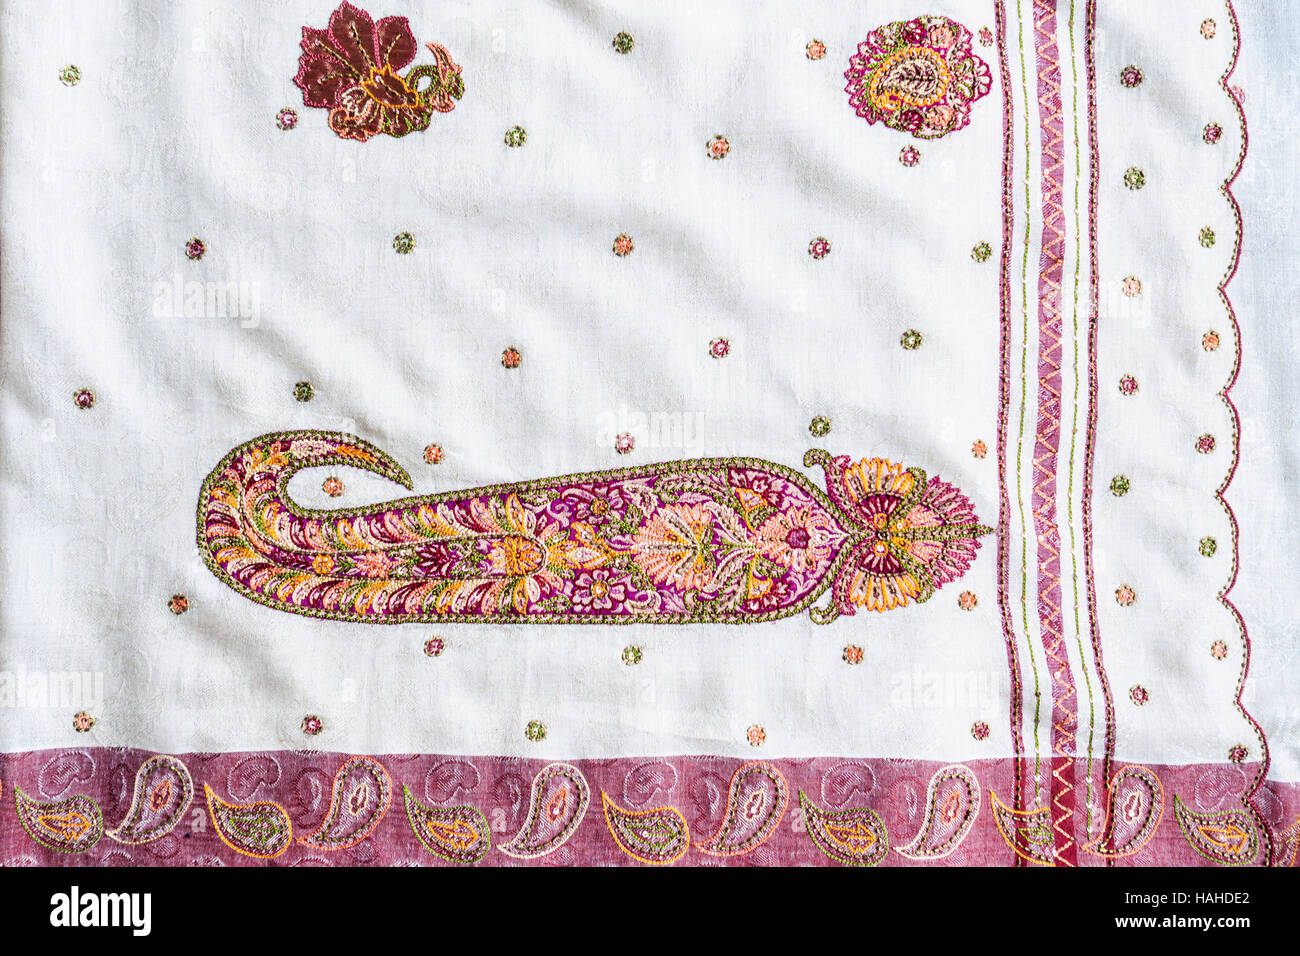 Paisley pattern on border and body of Indian saree Stock Photo